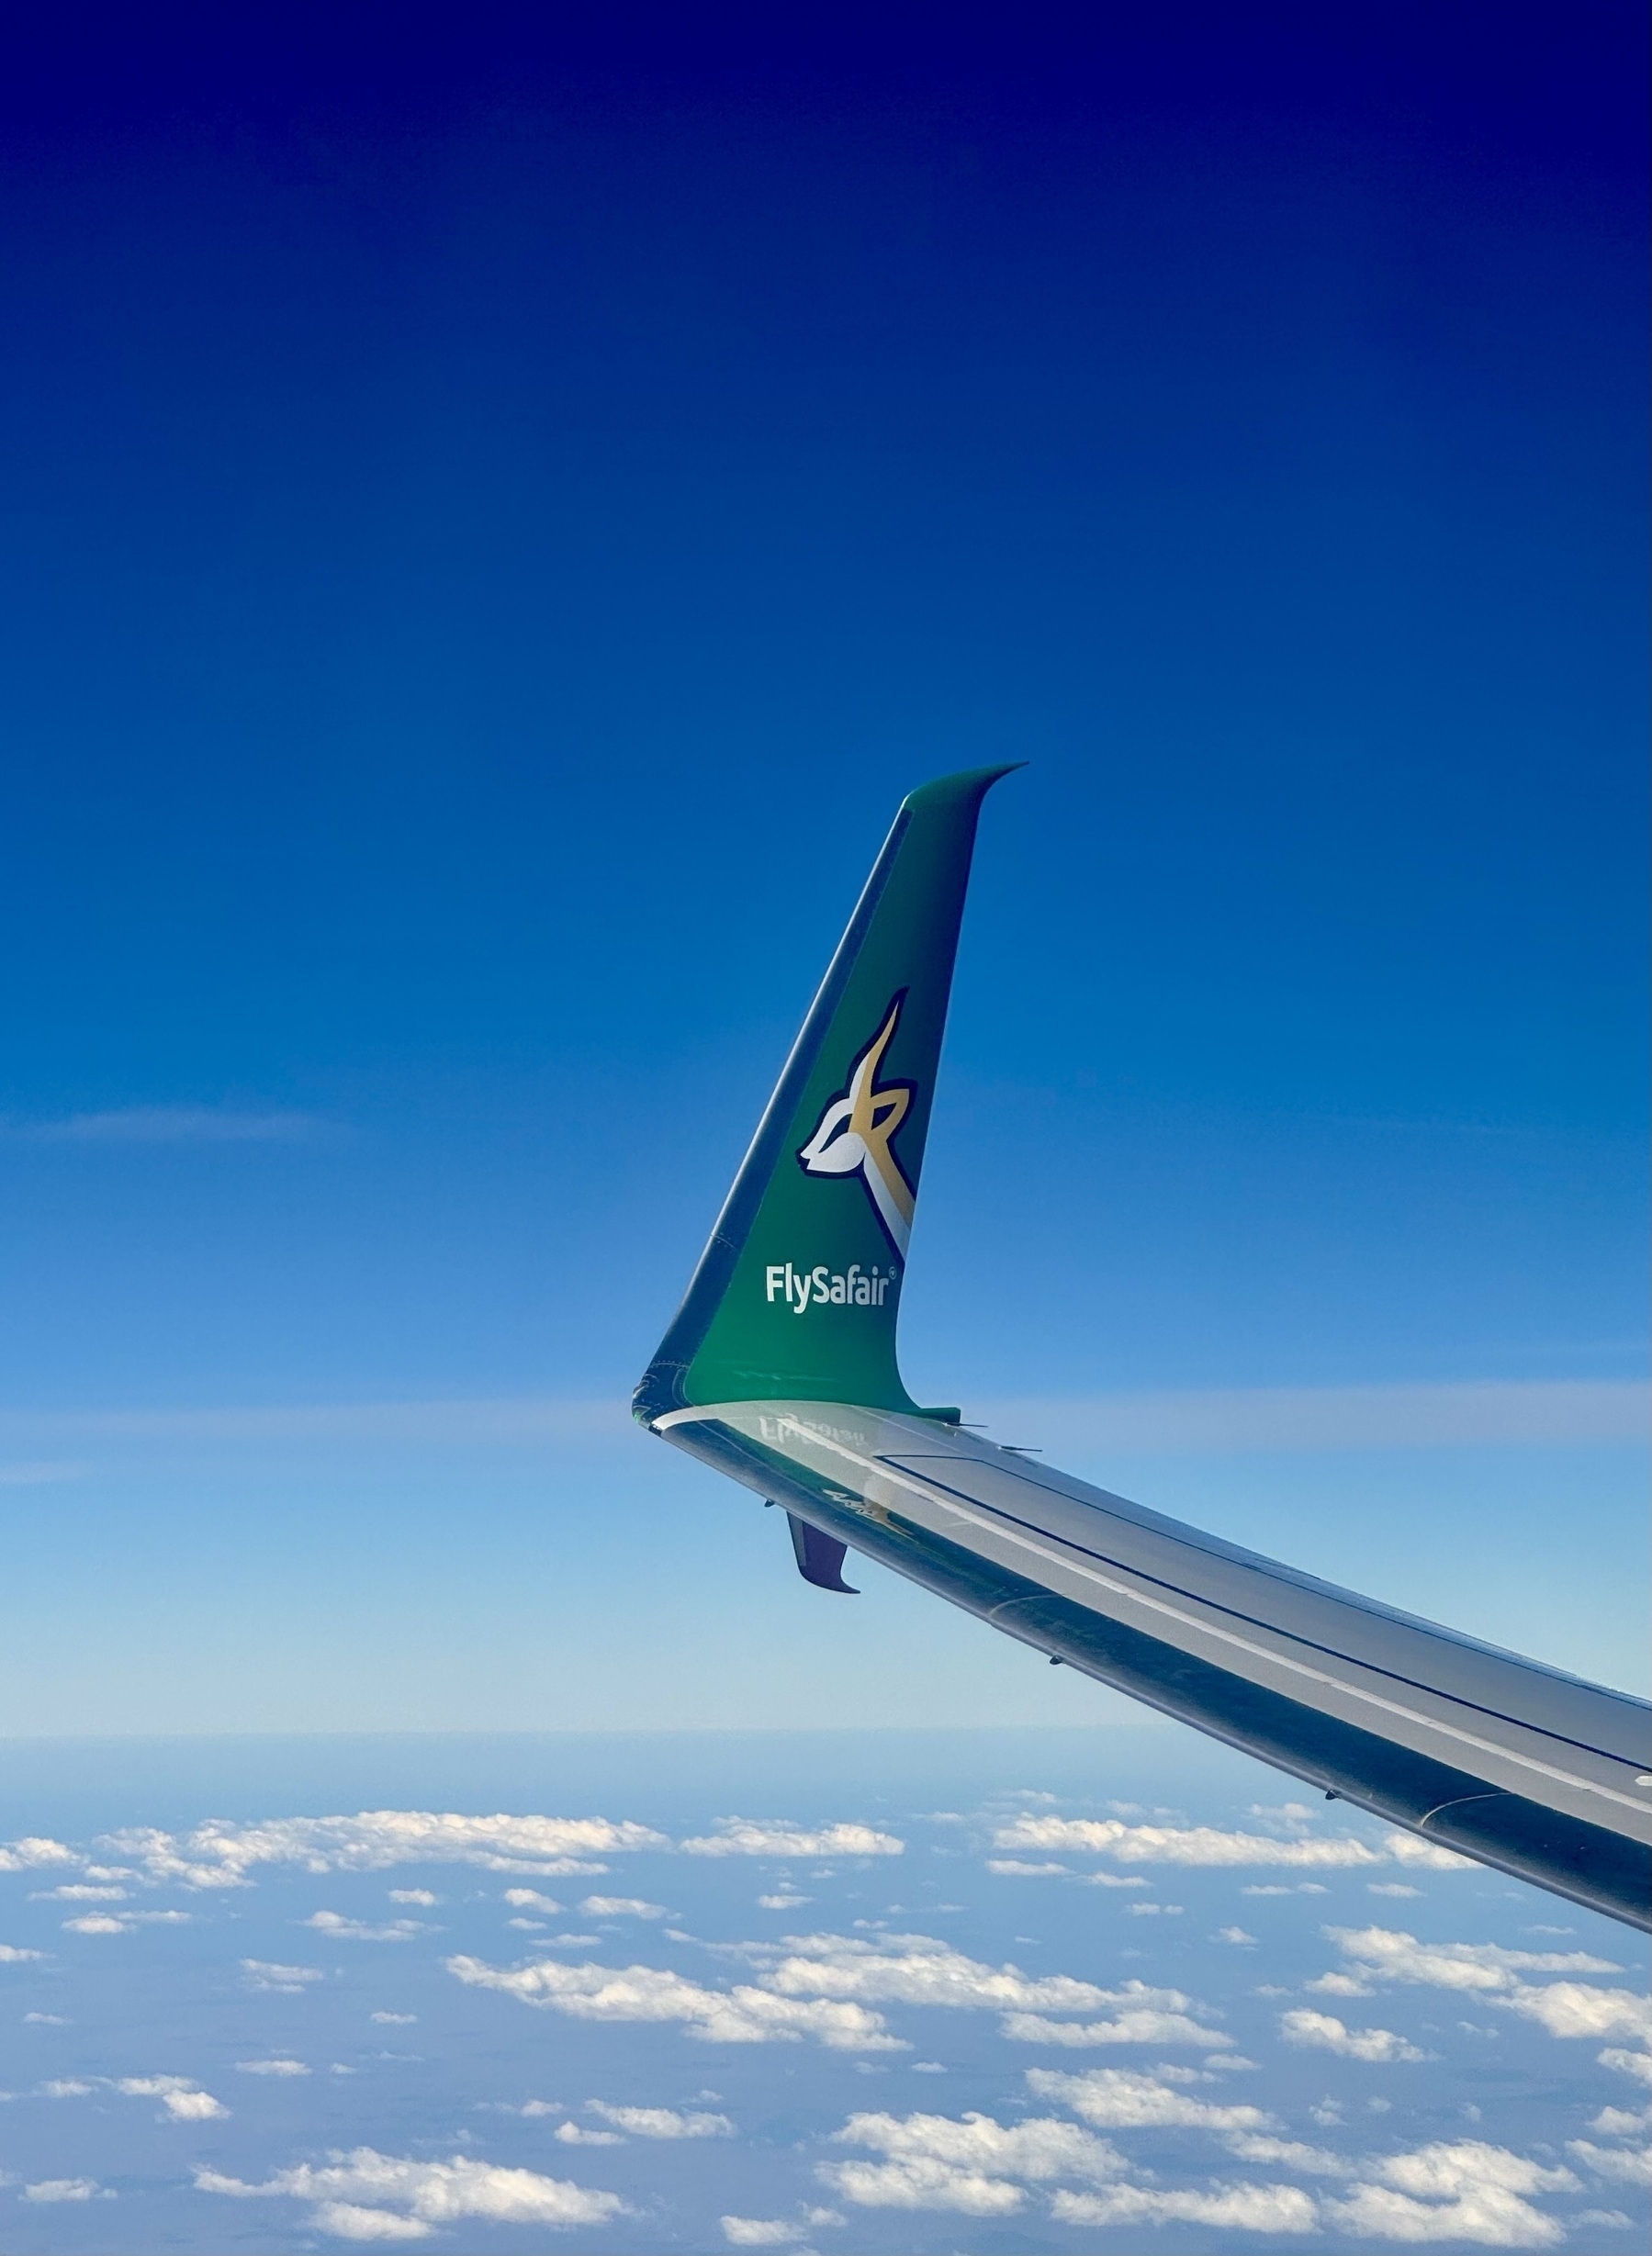 Photo of the wingtip of a plane in flight against a blue sky. The wingtip says “FlySafair”